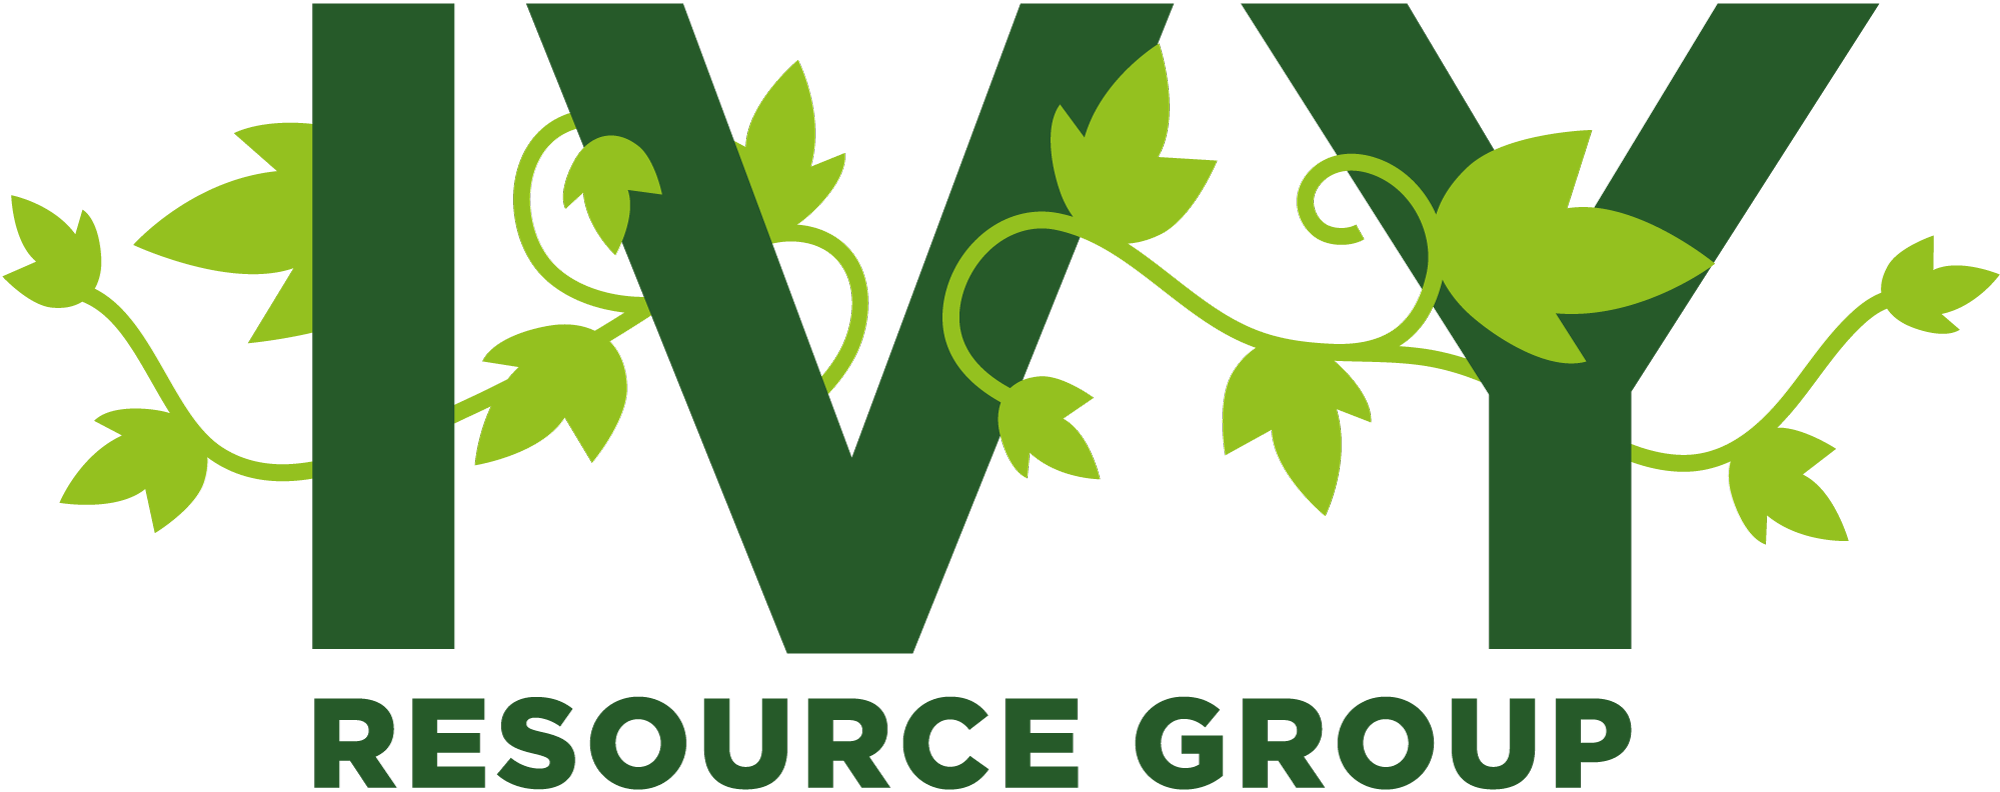 Ivy Resource Group